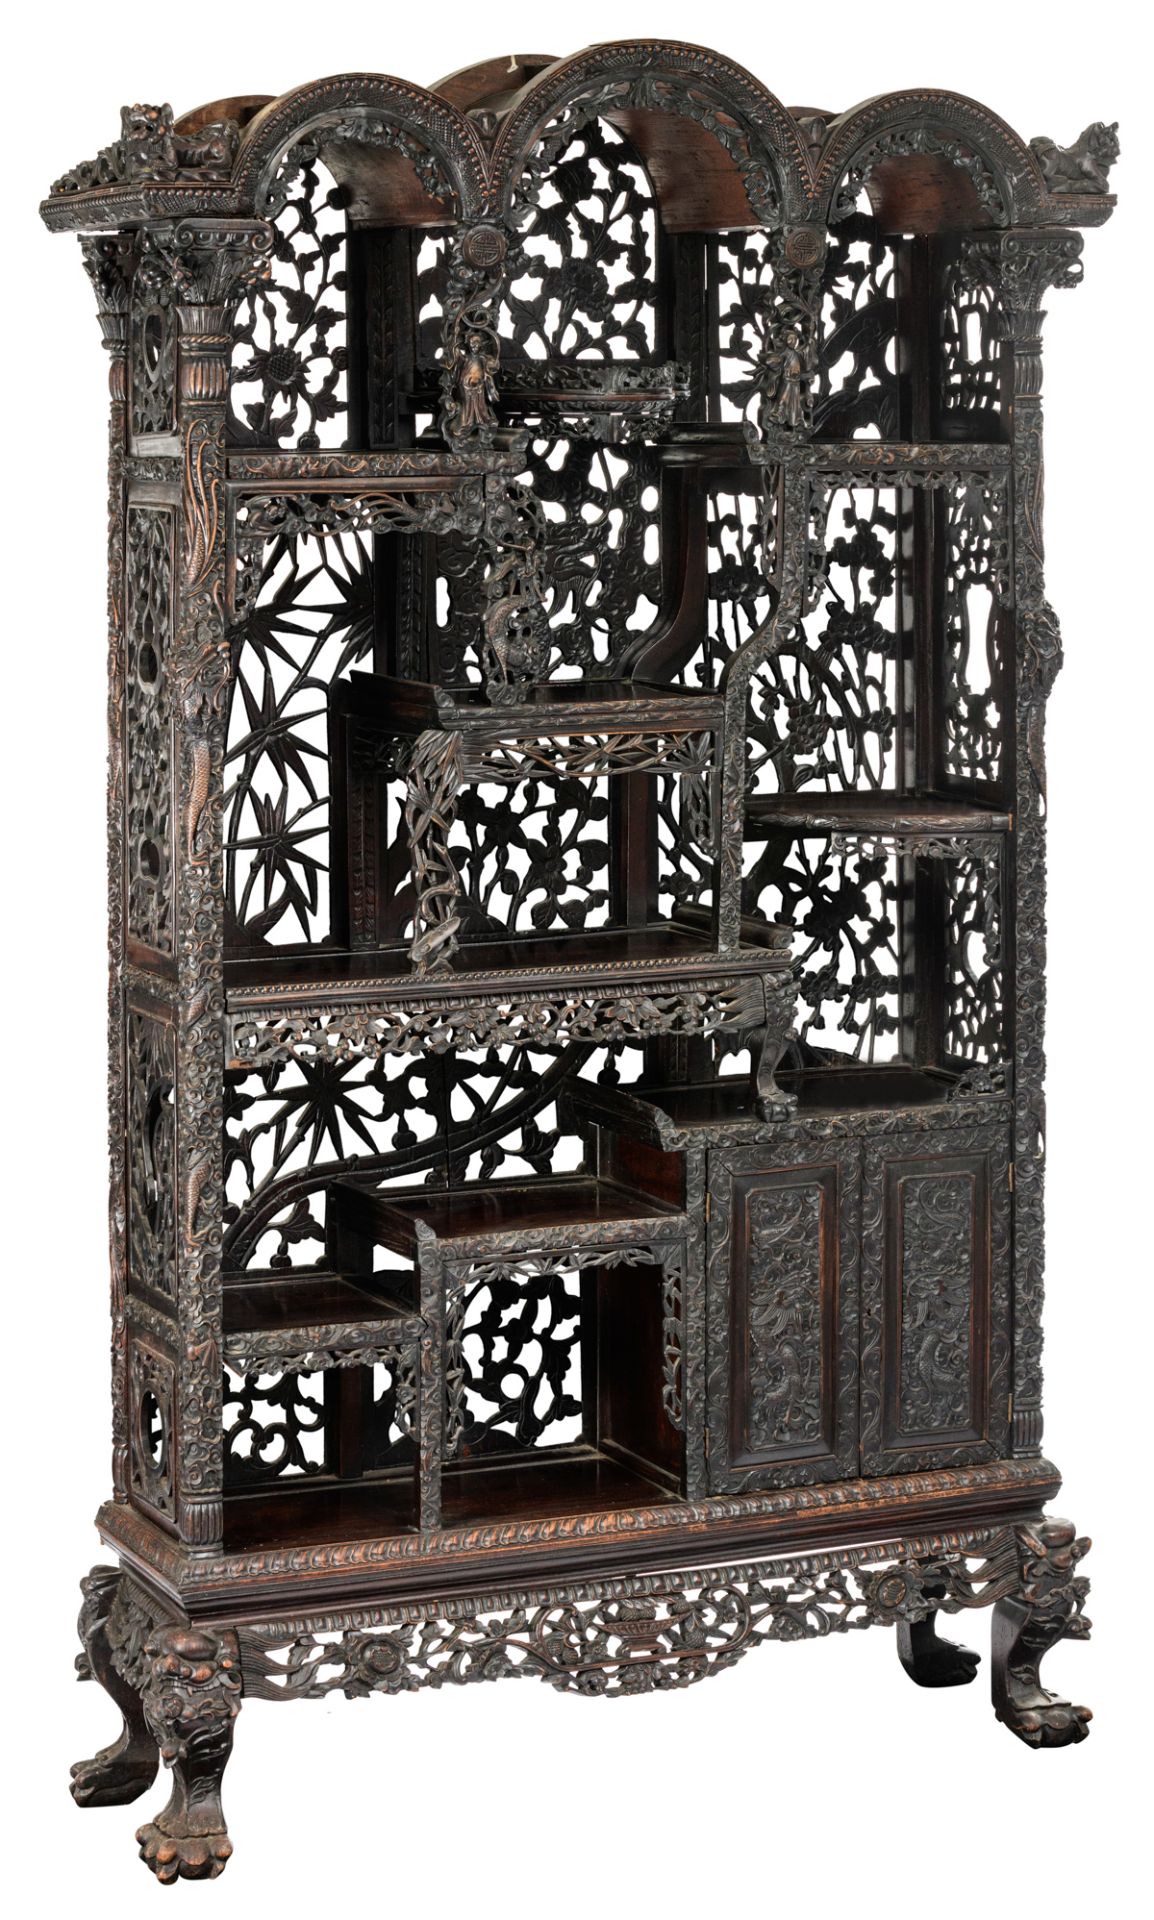 A Chinese exotic hardwood display cabinet, finely sculpted with floral decorations, dragons and Fu l